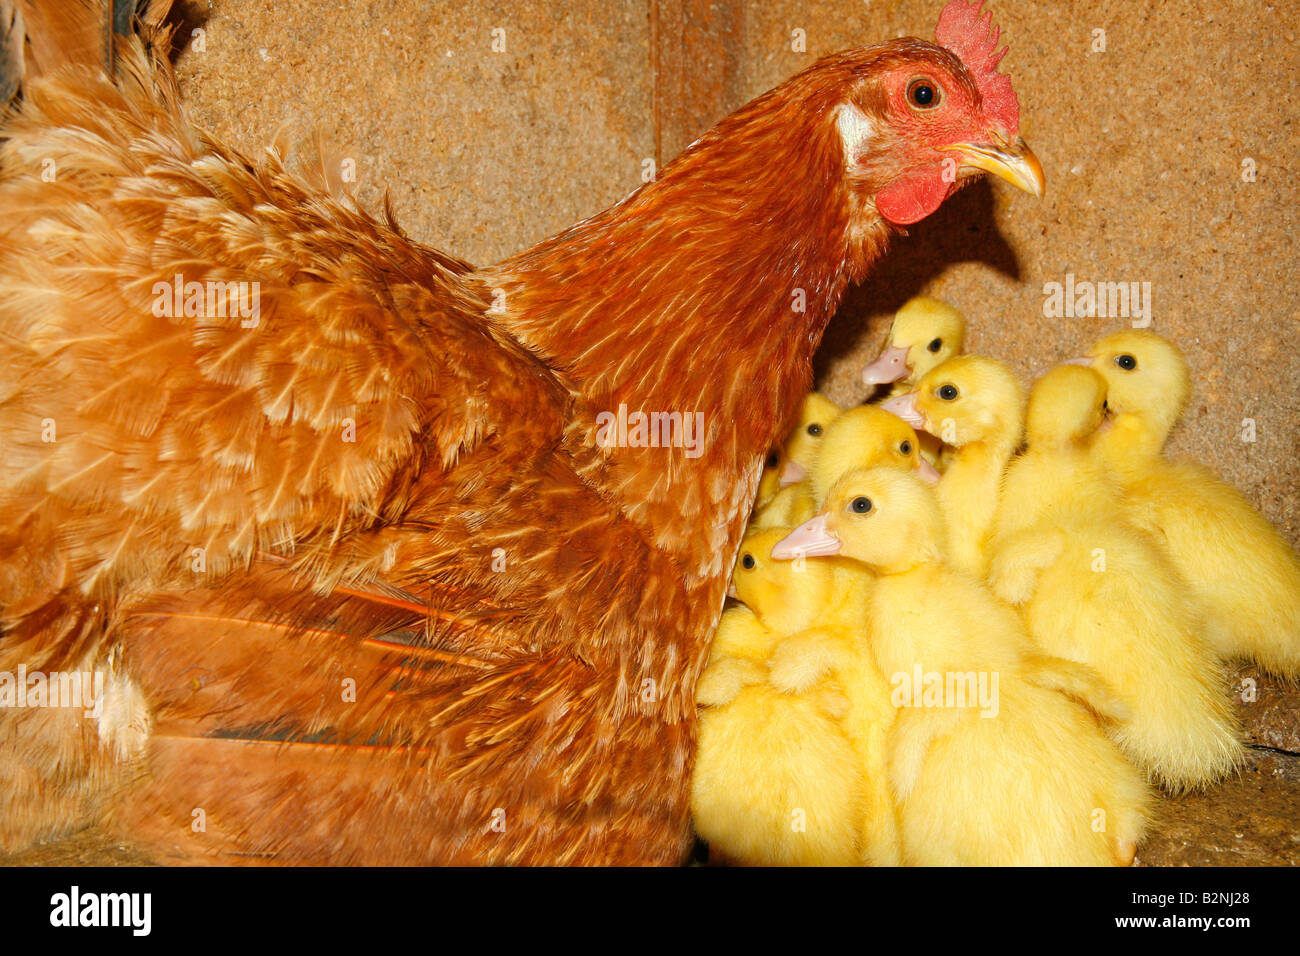 Adopted ducklings and their mother hen Stock Photo